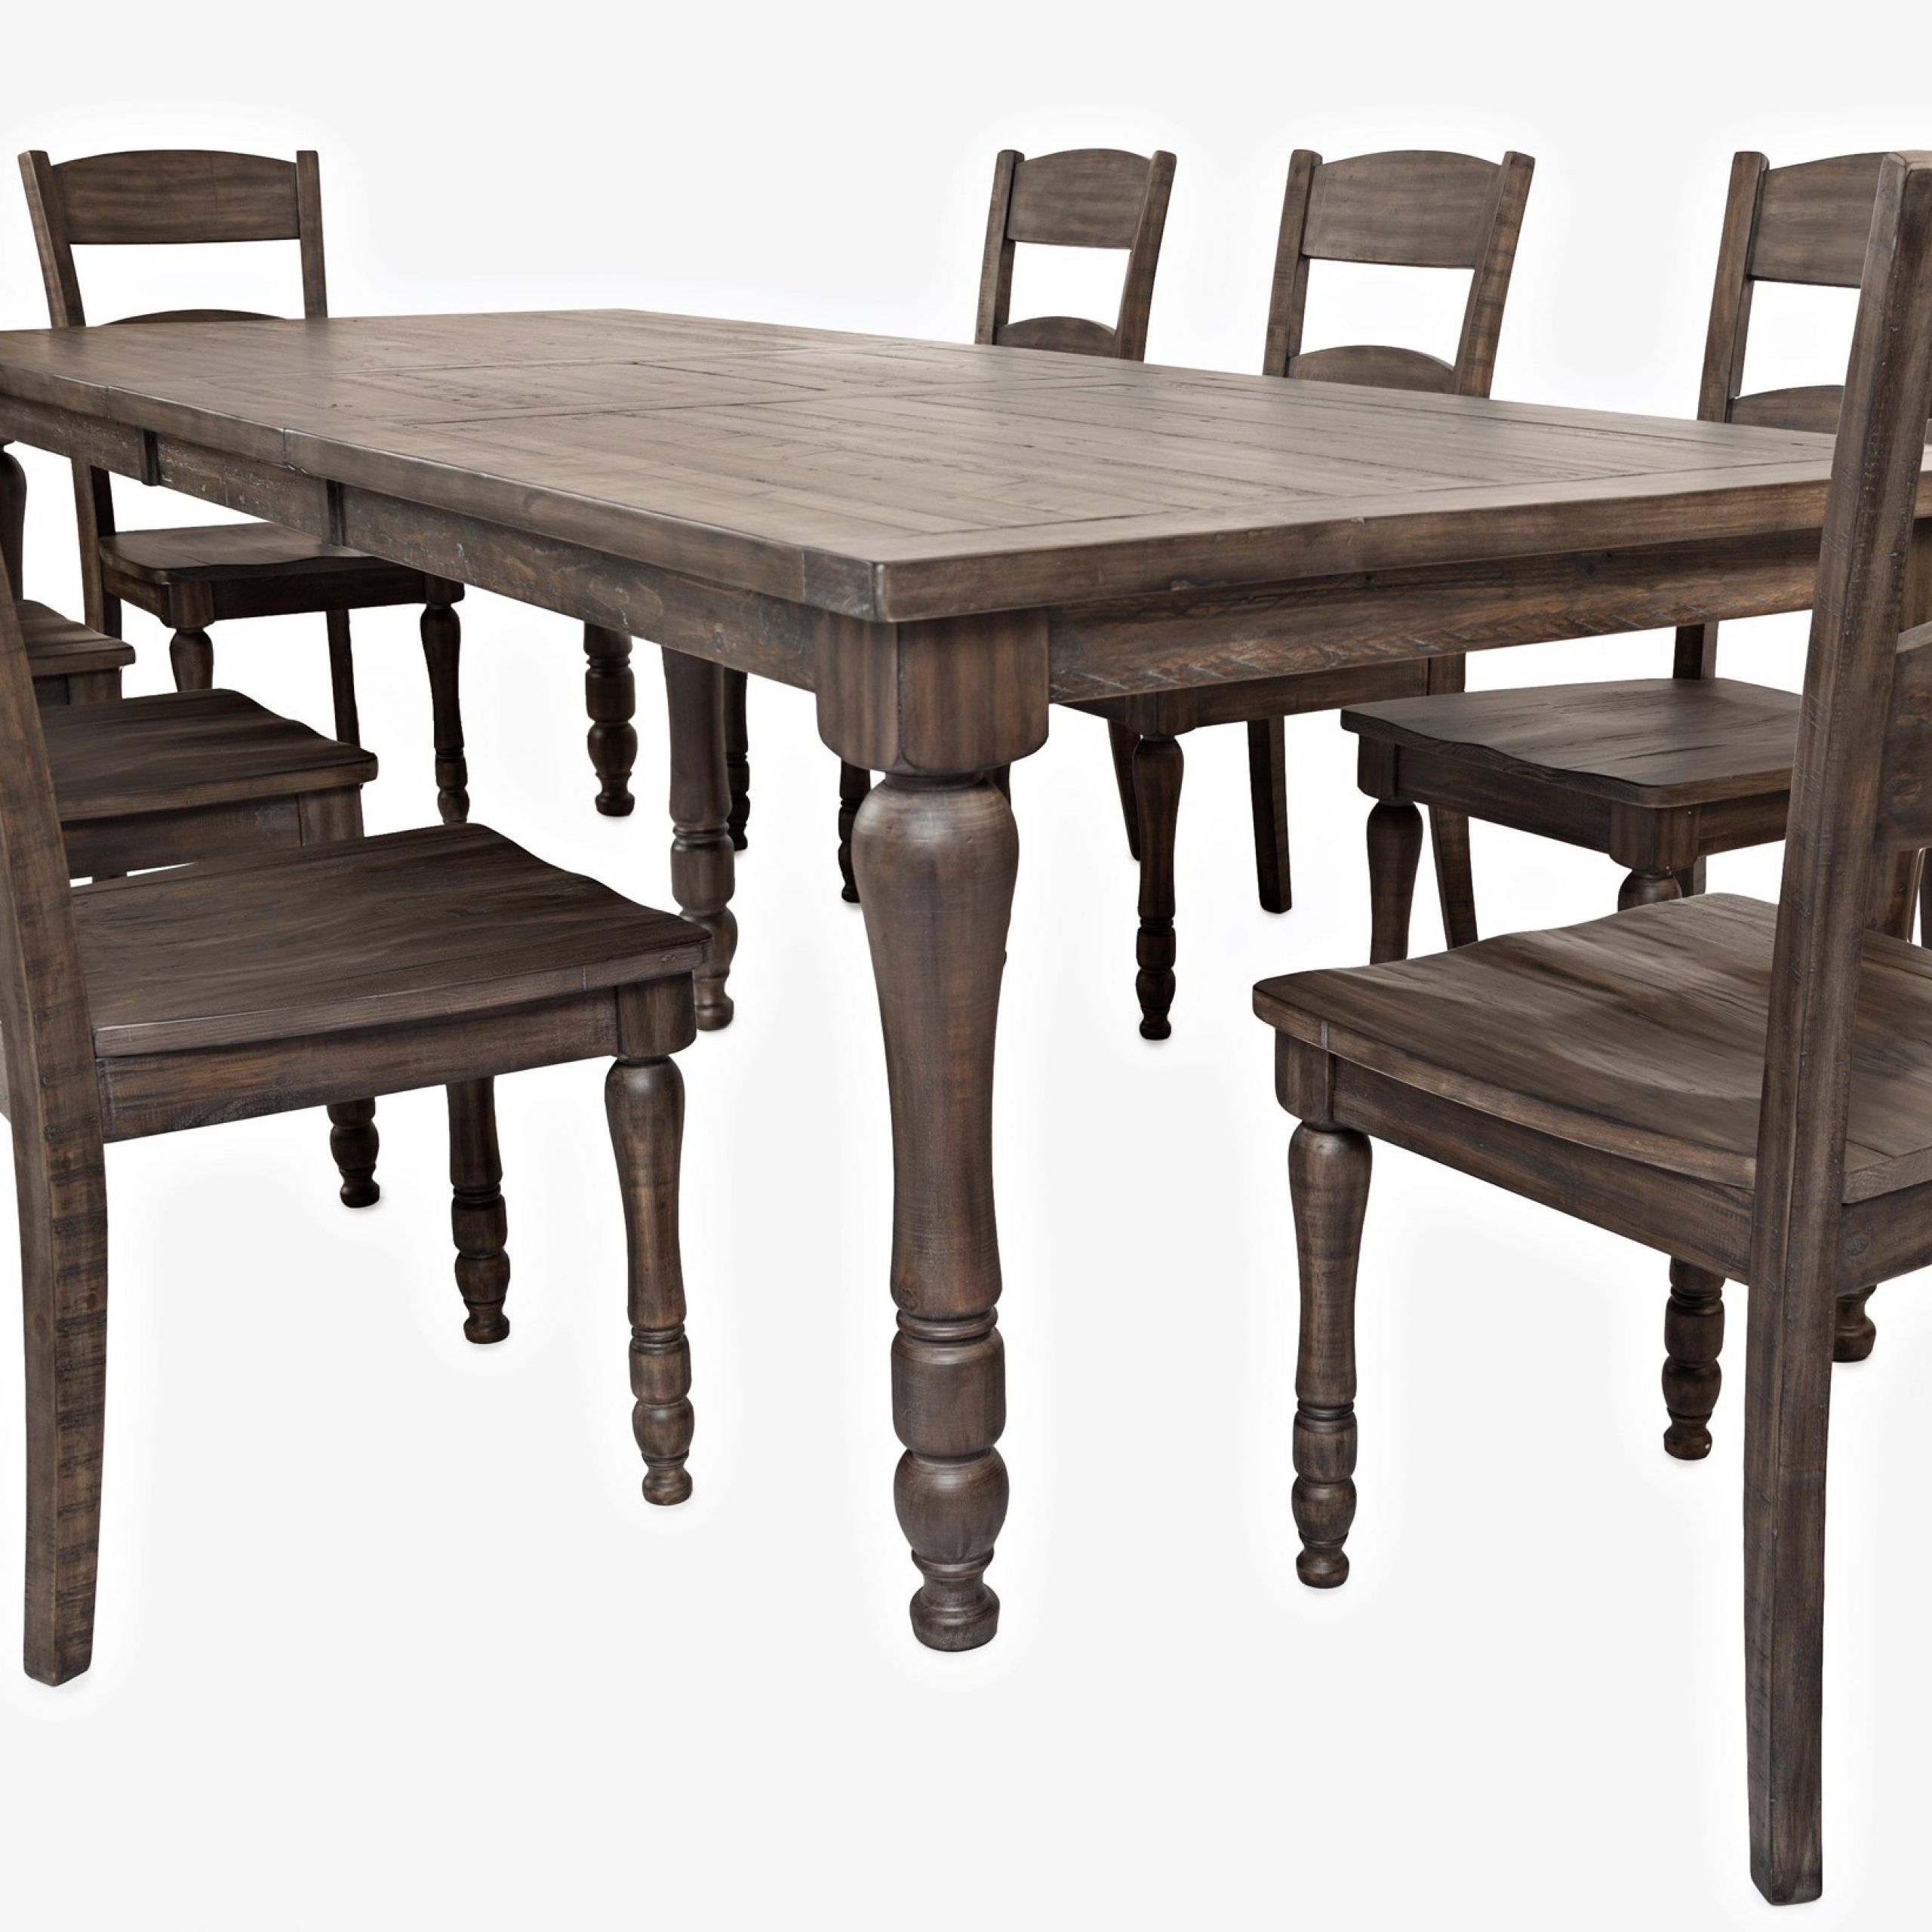 Current Babbie Butterfly Leaf Pine Solid Wood Trestle Dining Tables In Annie Oakley's Wood Furniture (View 16 of 20)